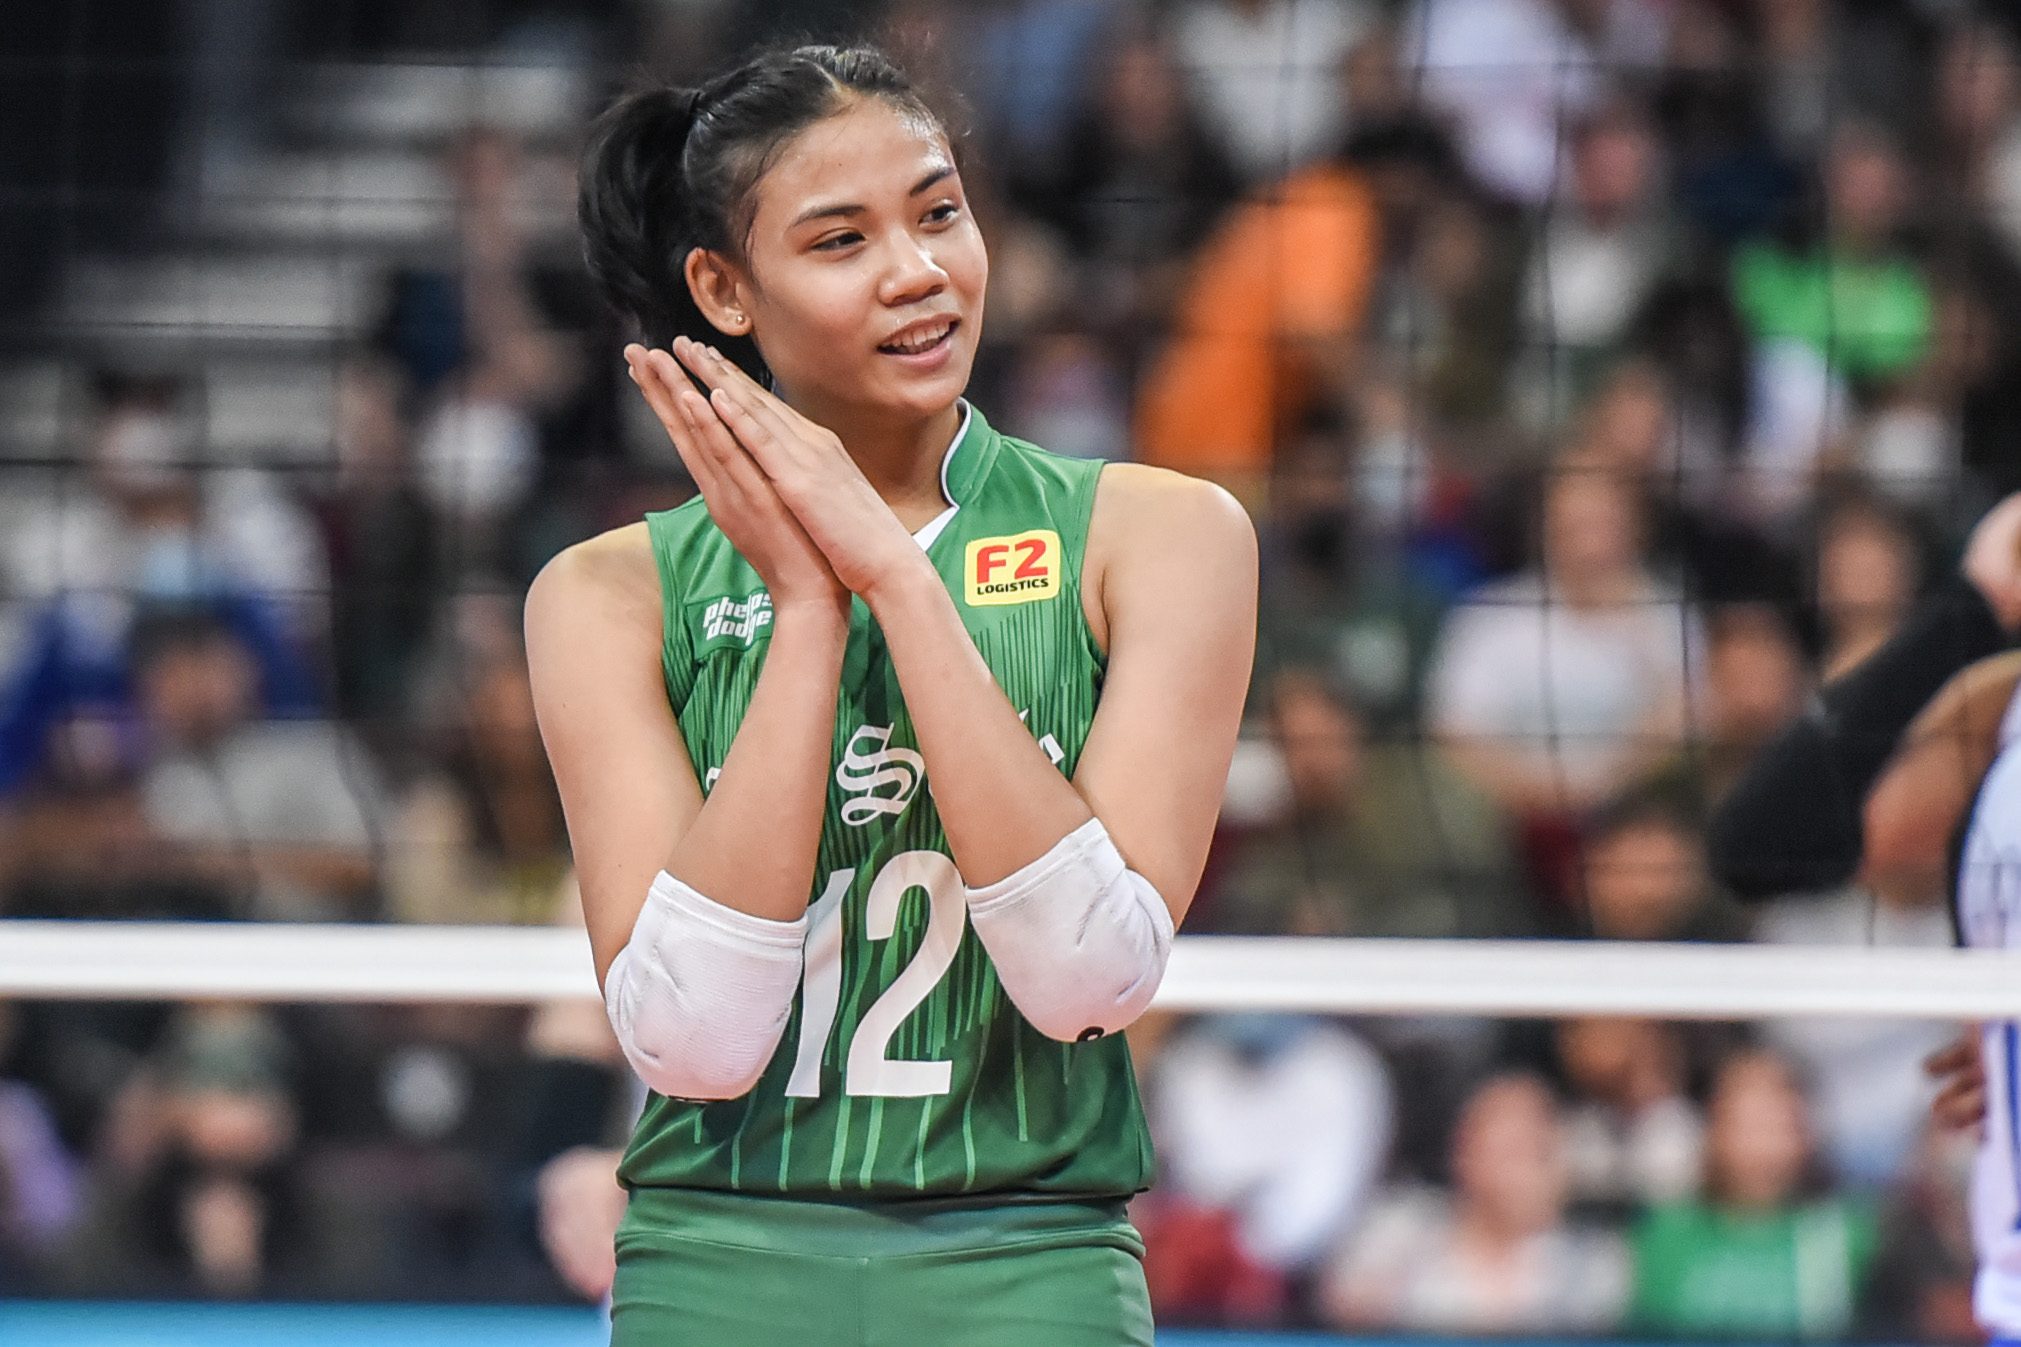 Unbothered queen? Canino puts Ateneo-La Salle pressure in backseat to stay in form